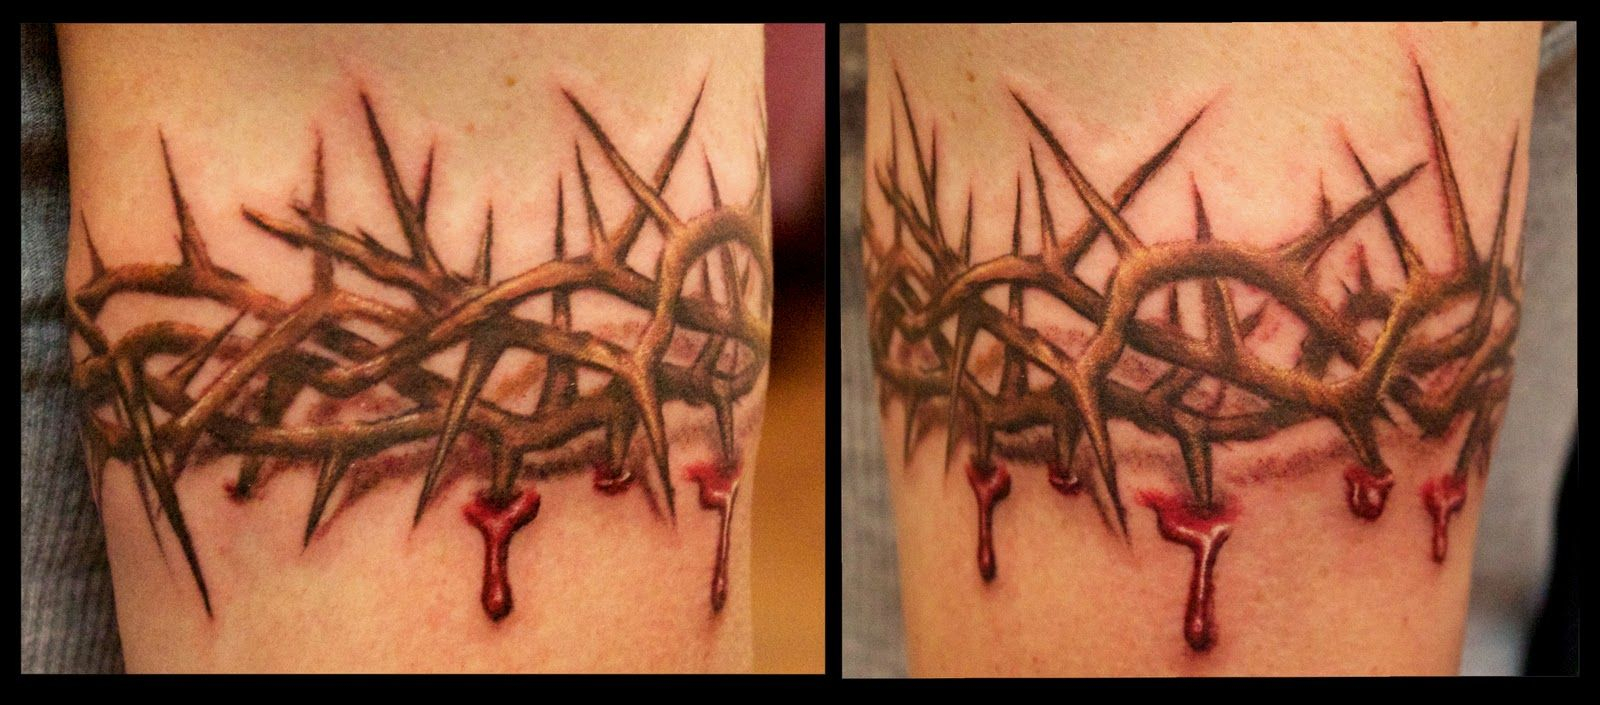 3d Crown Of Thorns Arm Band Tattoo Google Search For My Dad intended for size 1600 X 705